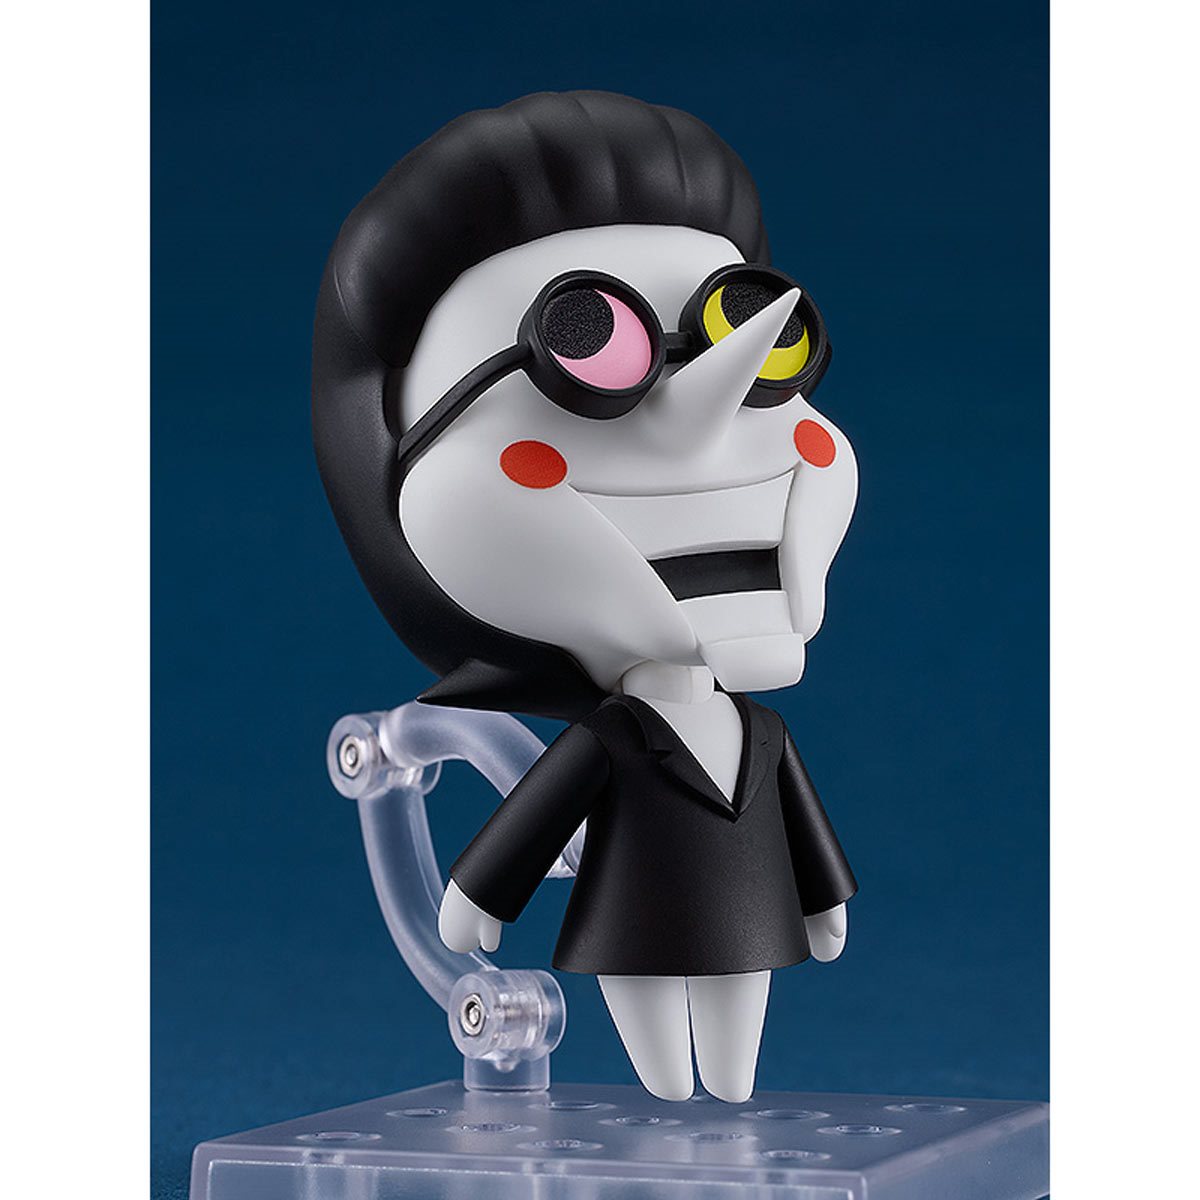 Nendoroid Bendy & Ink Demon (Bendy and the Ink Machine)